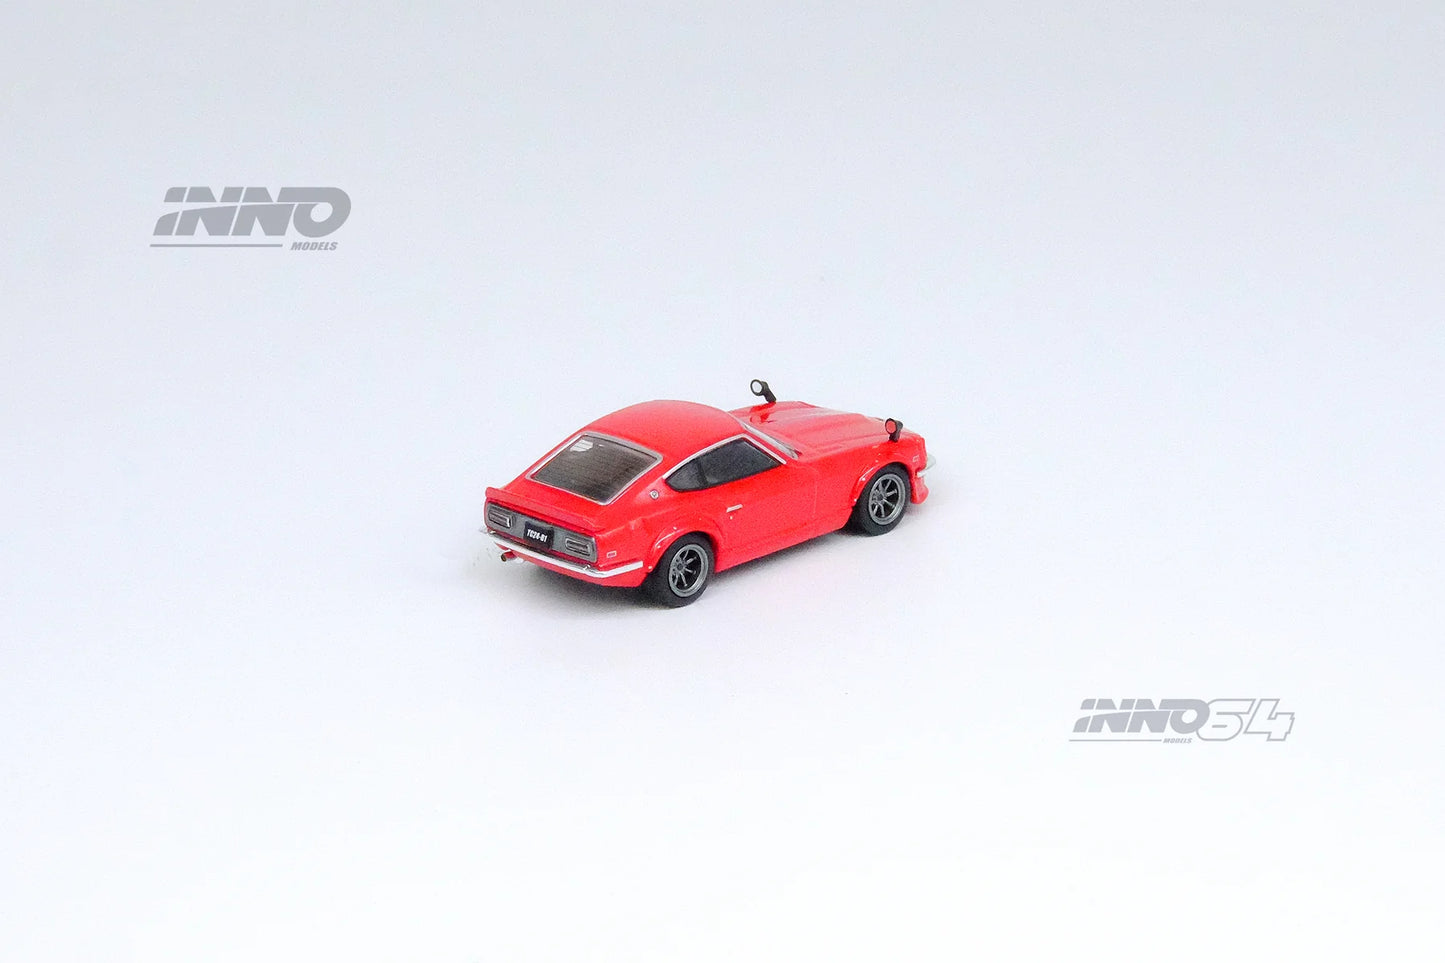 Inno64 Nissan Fairlady Z S30 Red 1:64